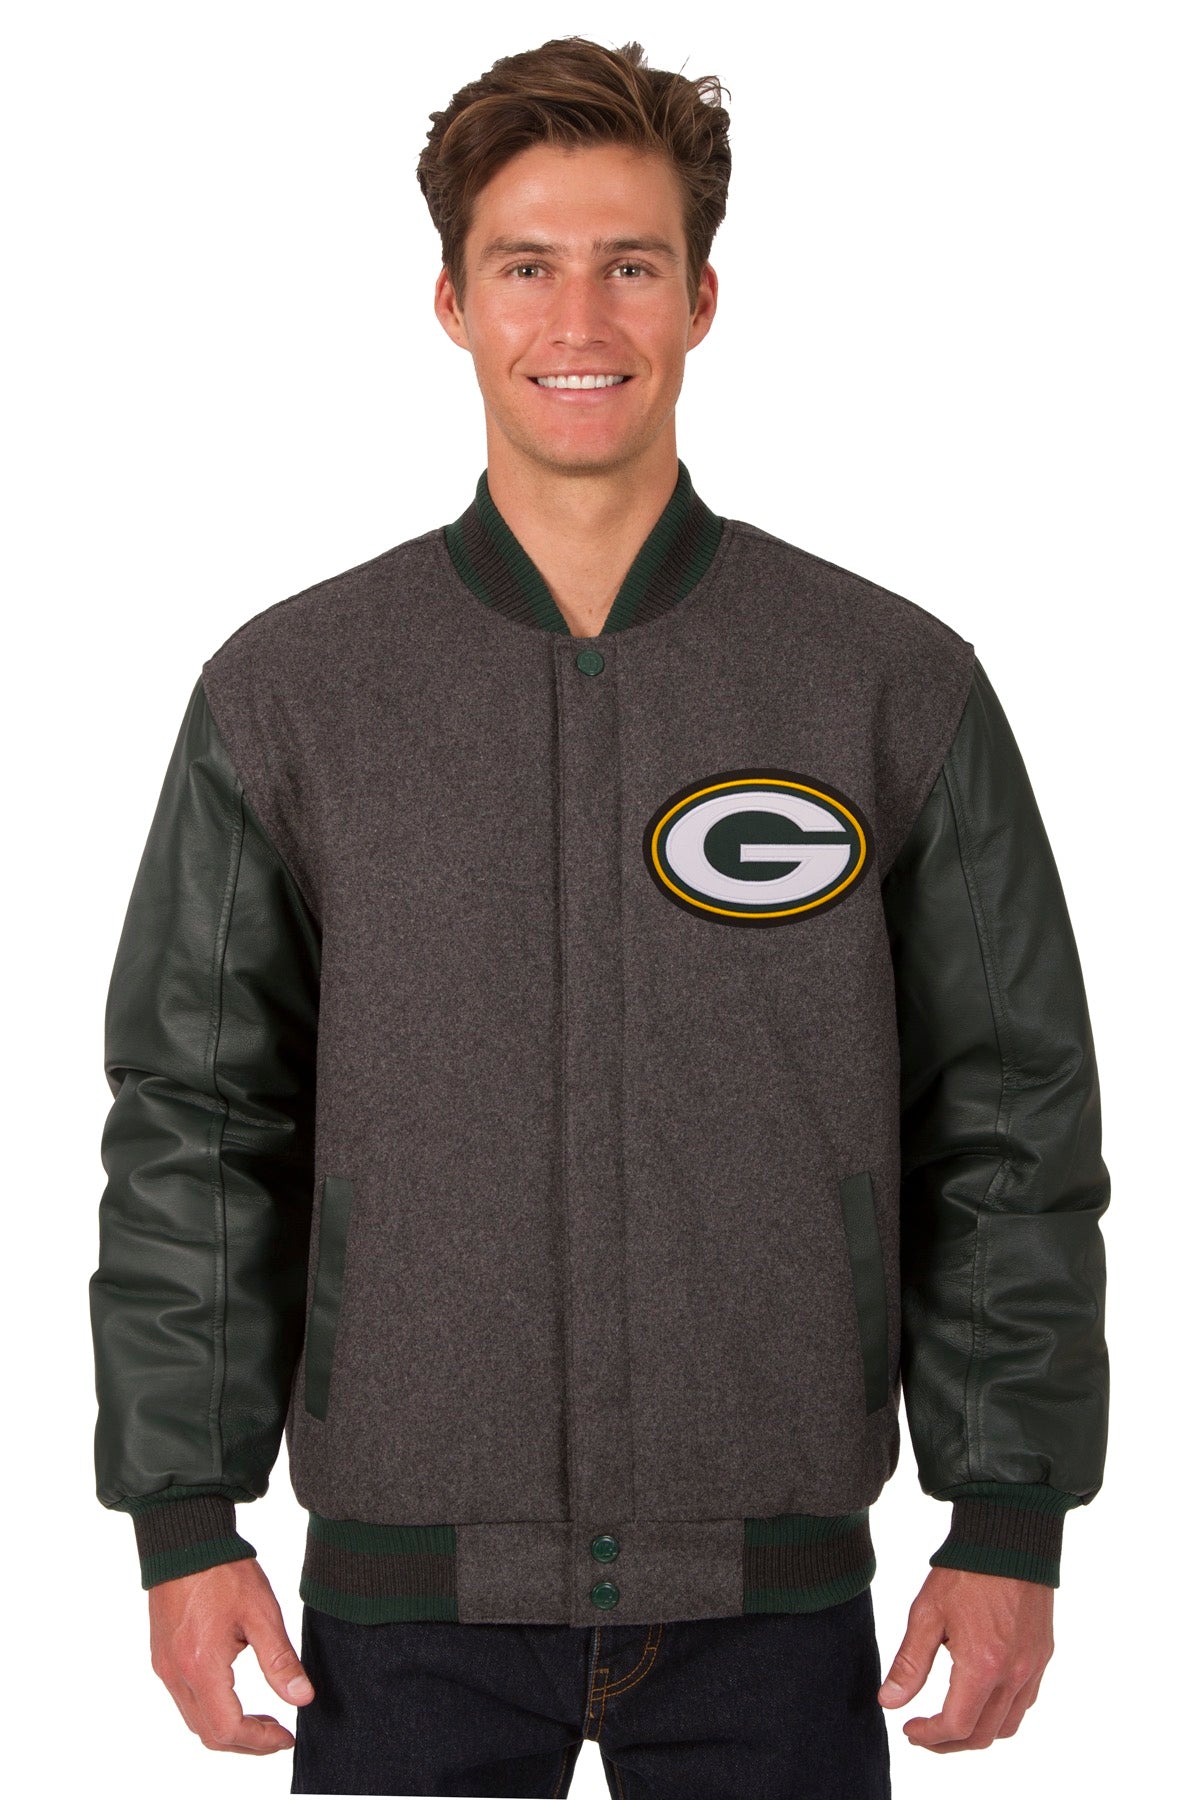 Maker of Jacket NFL Green Bay Packers Wool Leather